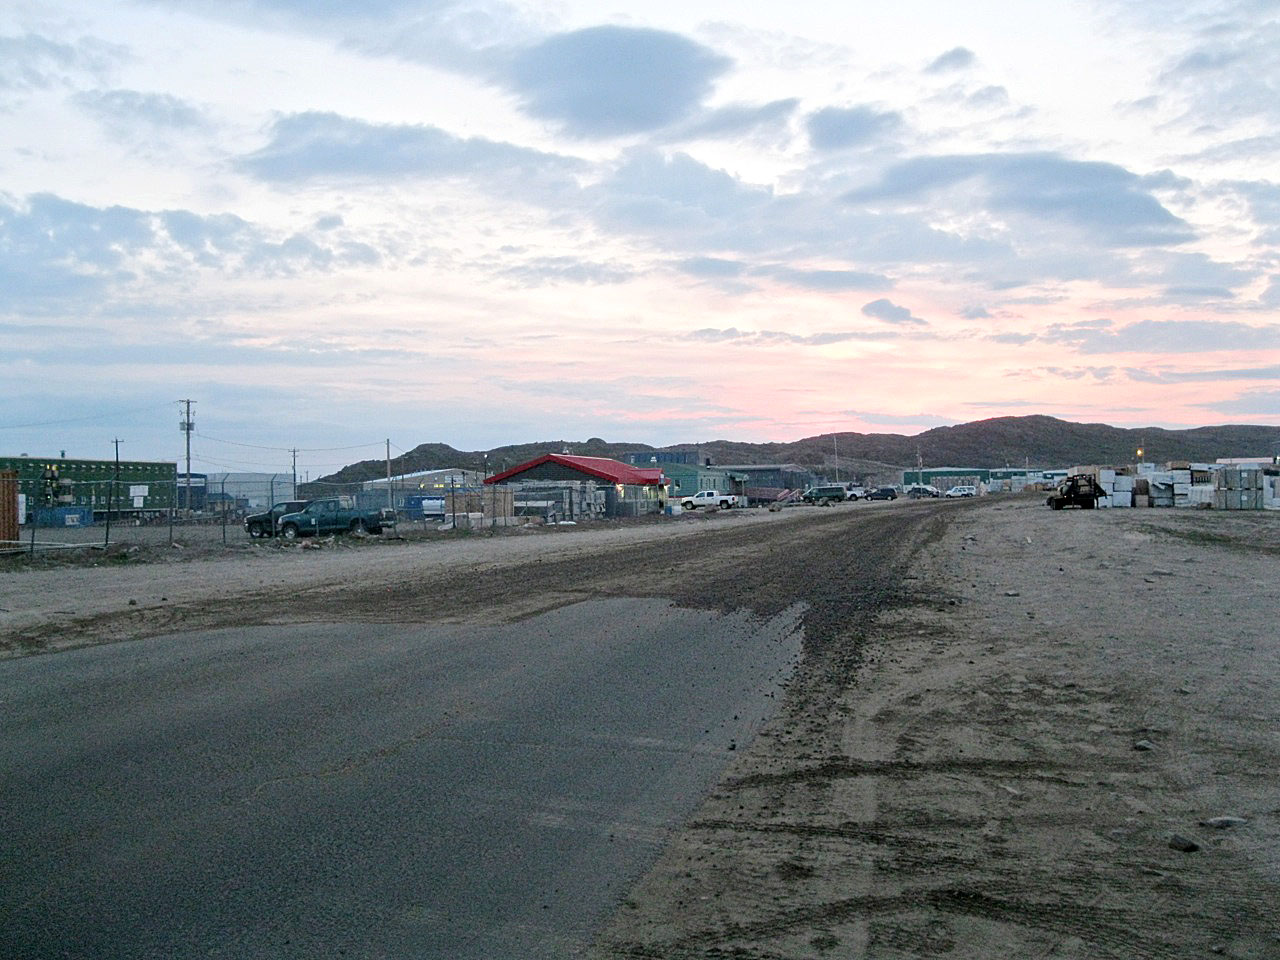 A view of Iqaluit's Federal Road last summer. Arctic Infrastructure Partners, builder of the territorial government’s $300 million Iqaluit airport construction project, has agreed to cover part of the cost of repairing Federal Road from the city centre to the North 40 area. (PHOTO BY PETER VARGA)